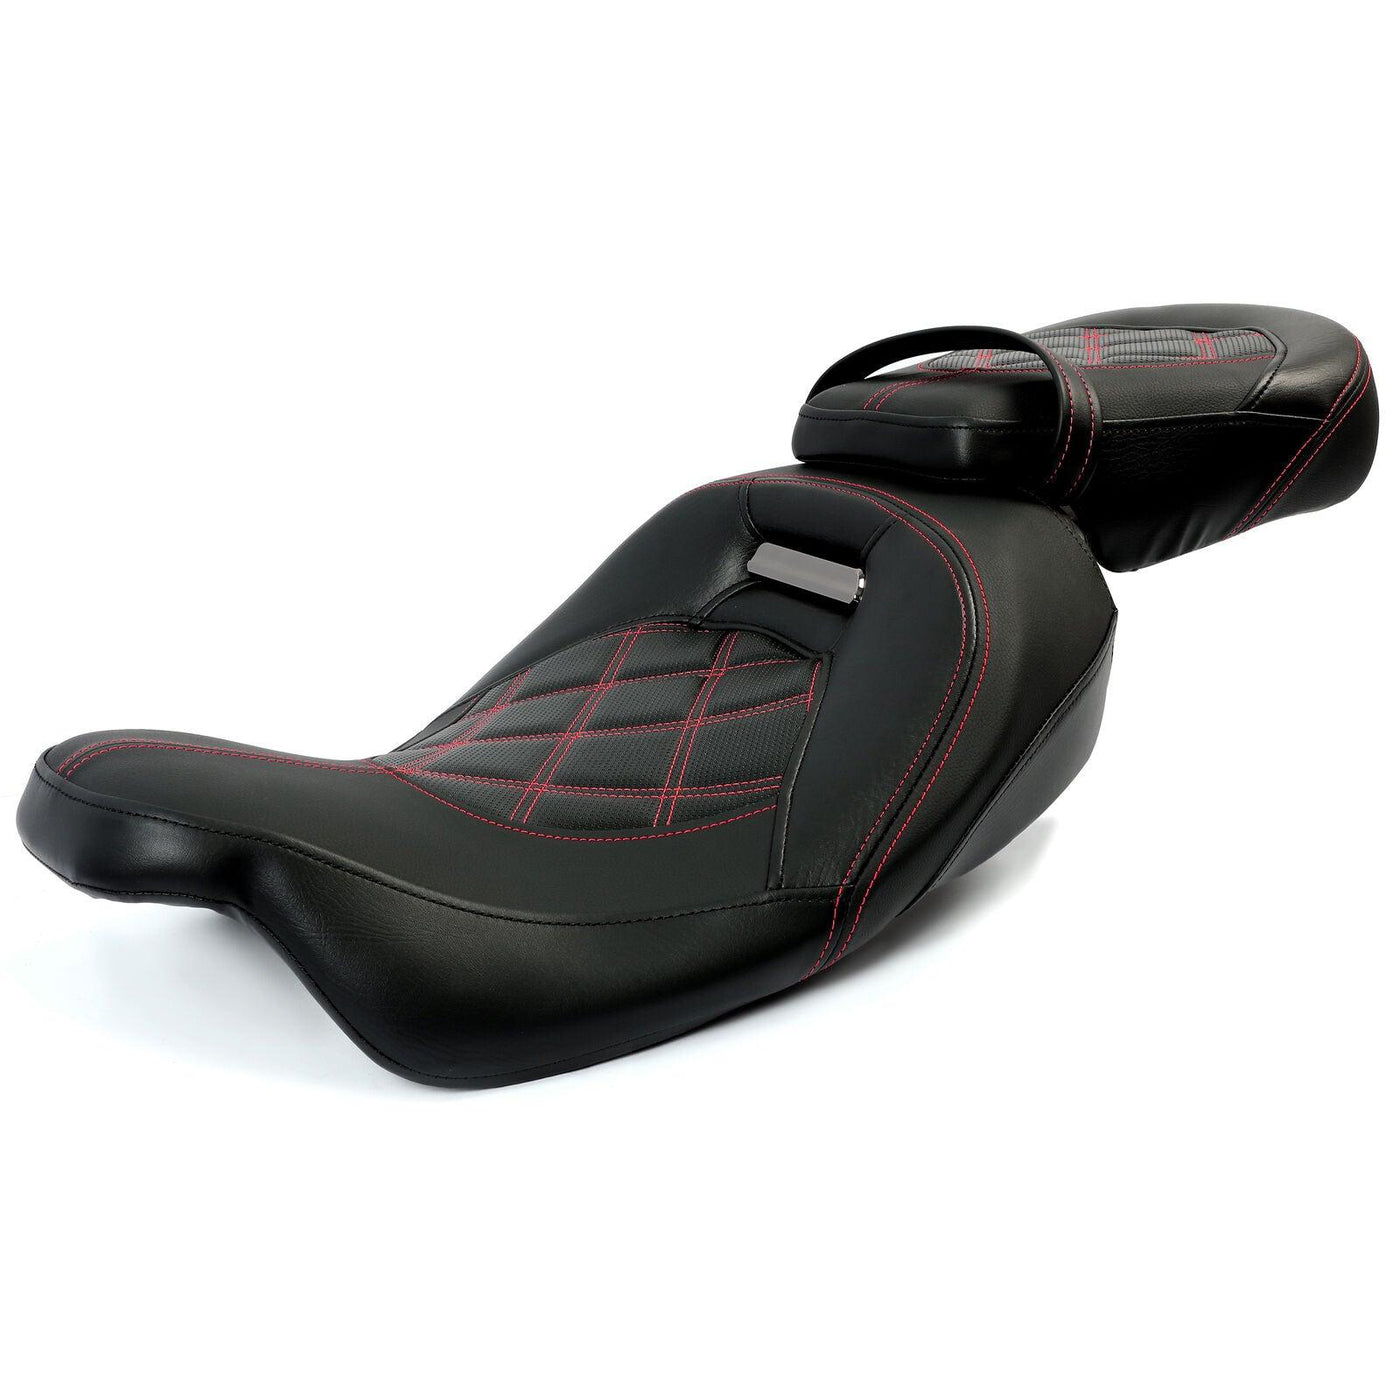 Driver Passenger Pillion Seat For 2009-2020 Harley Touring CVO Road Glide FLHR - Moto Life Products